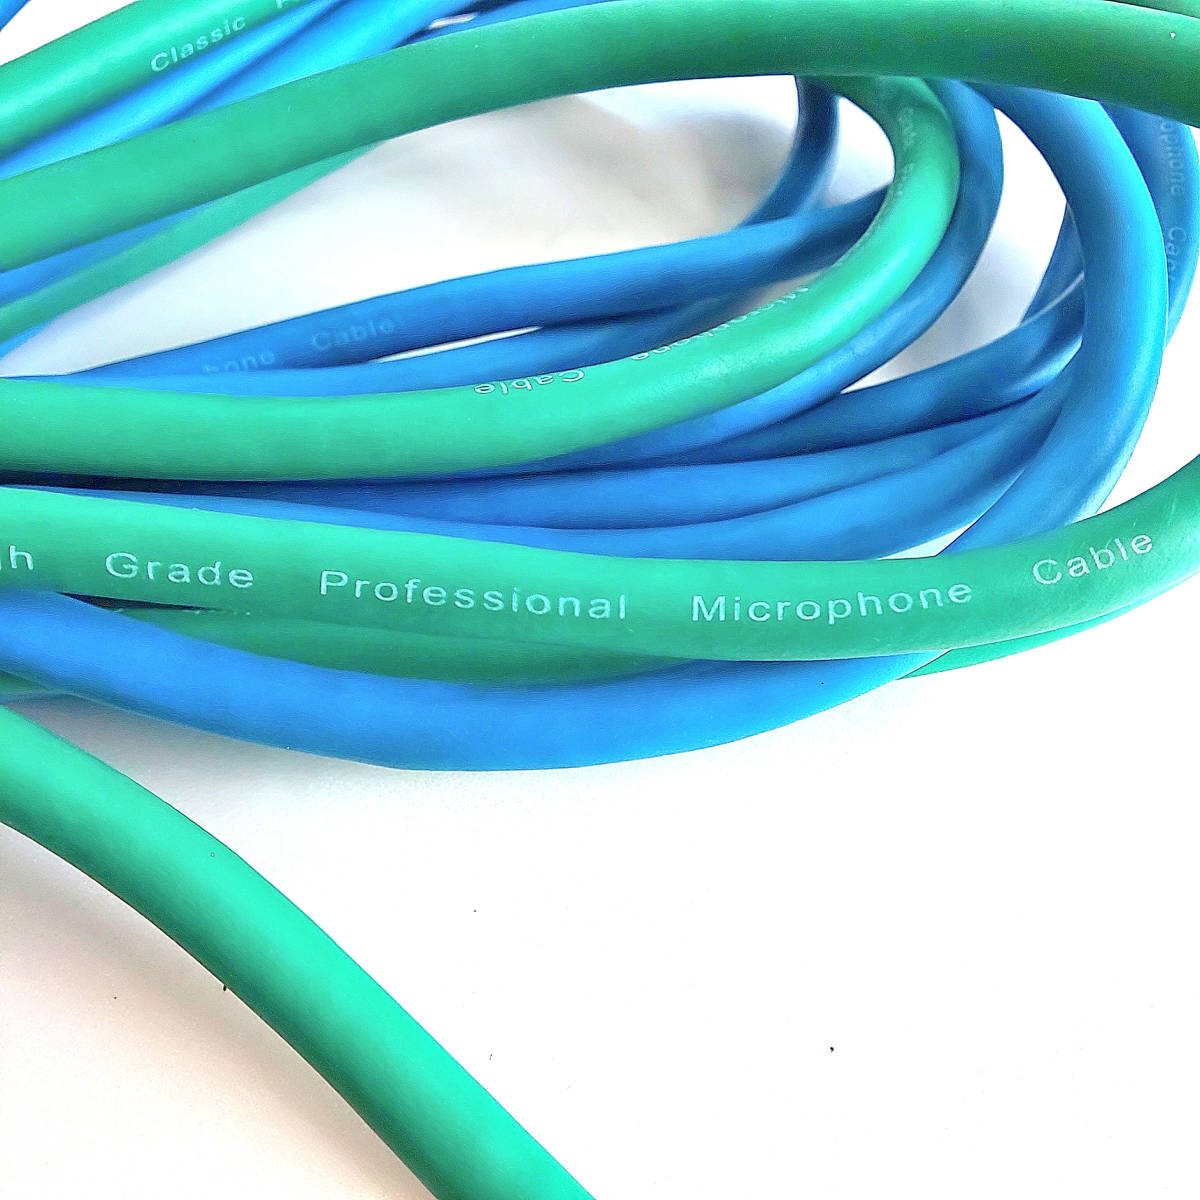 Classic Pro High Grade Professional Microphone Cable 3m x 3本セット_画像3